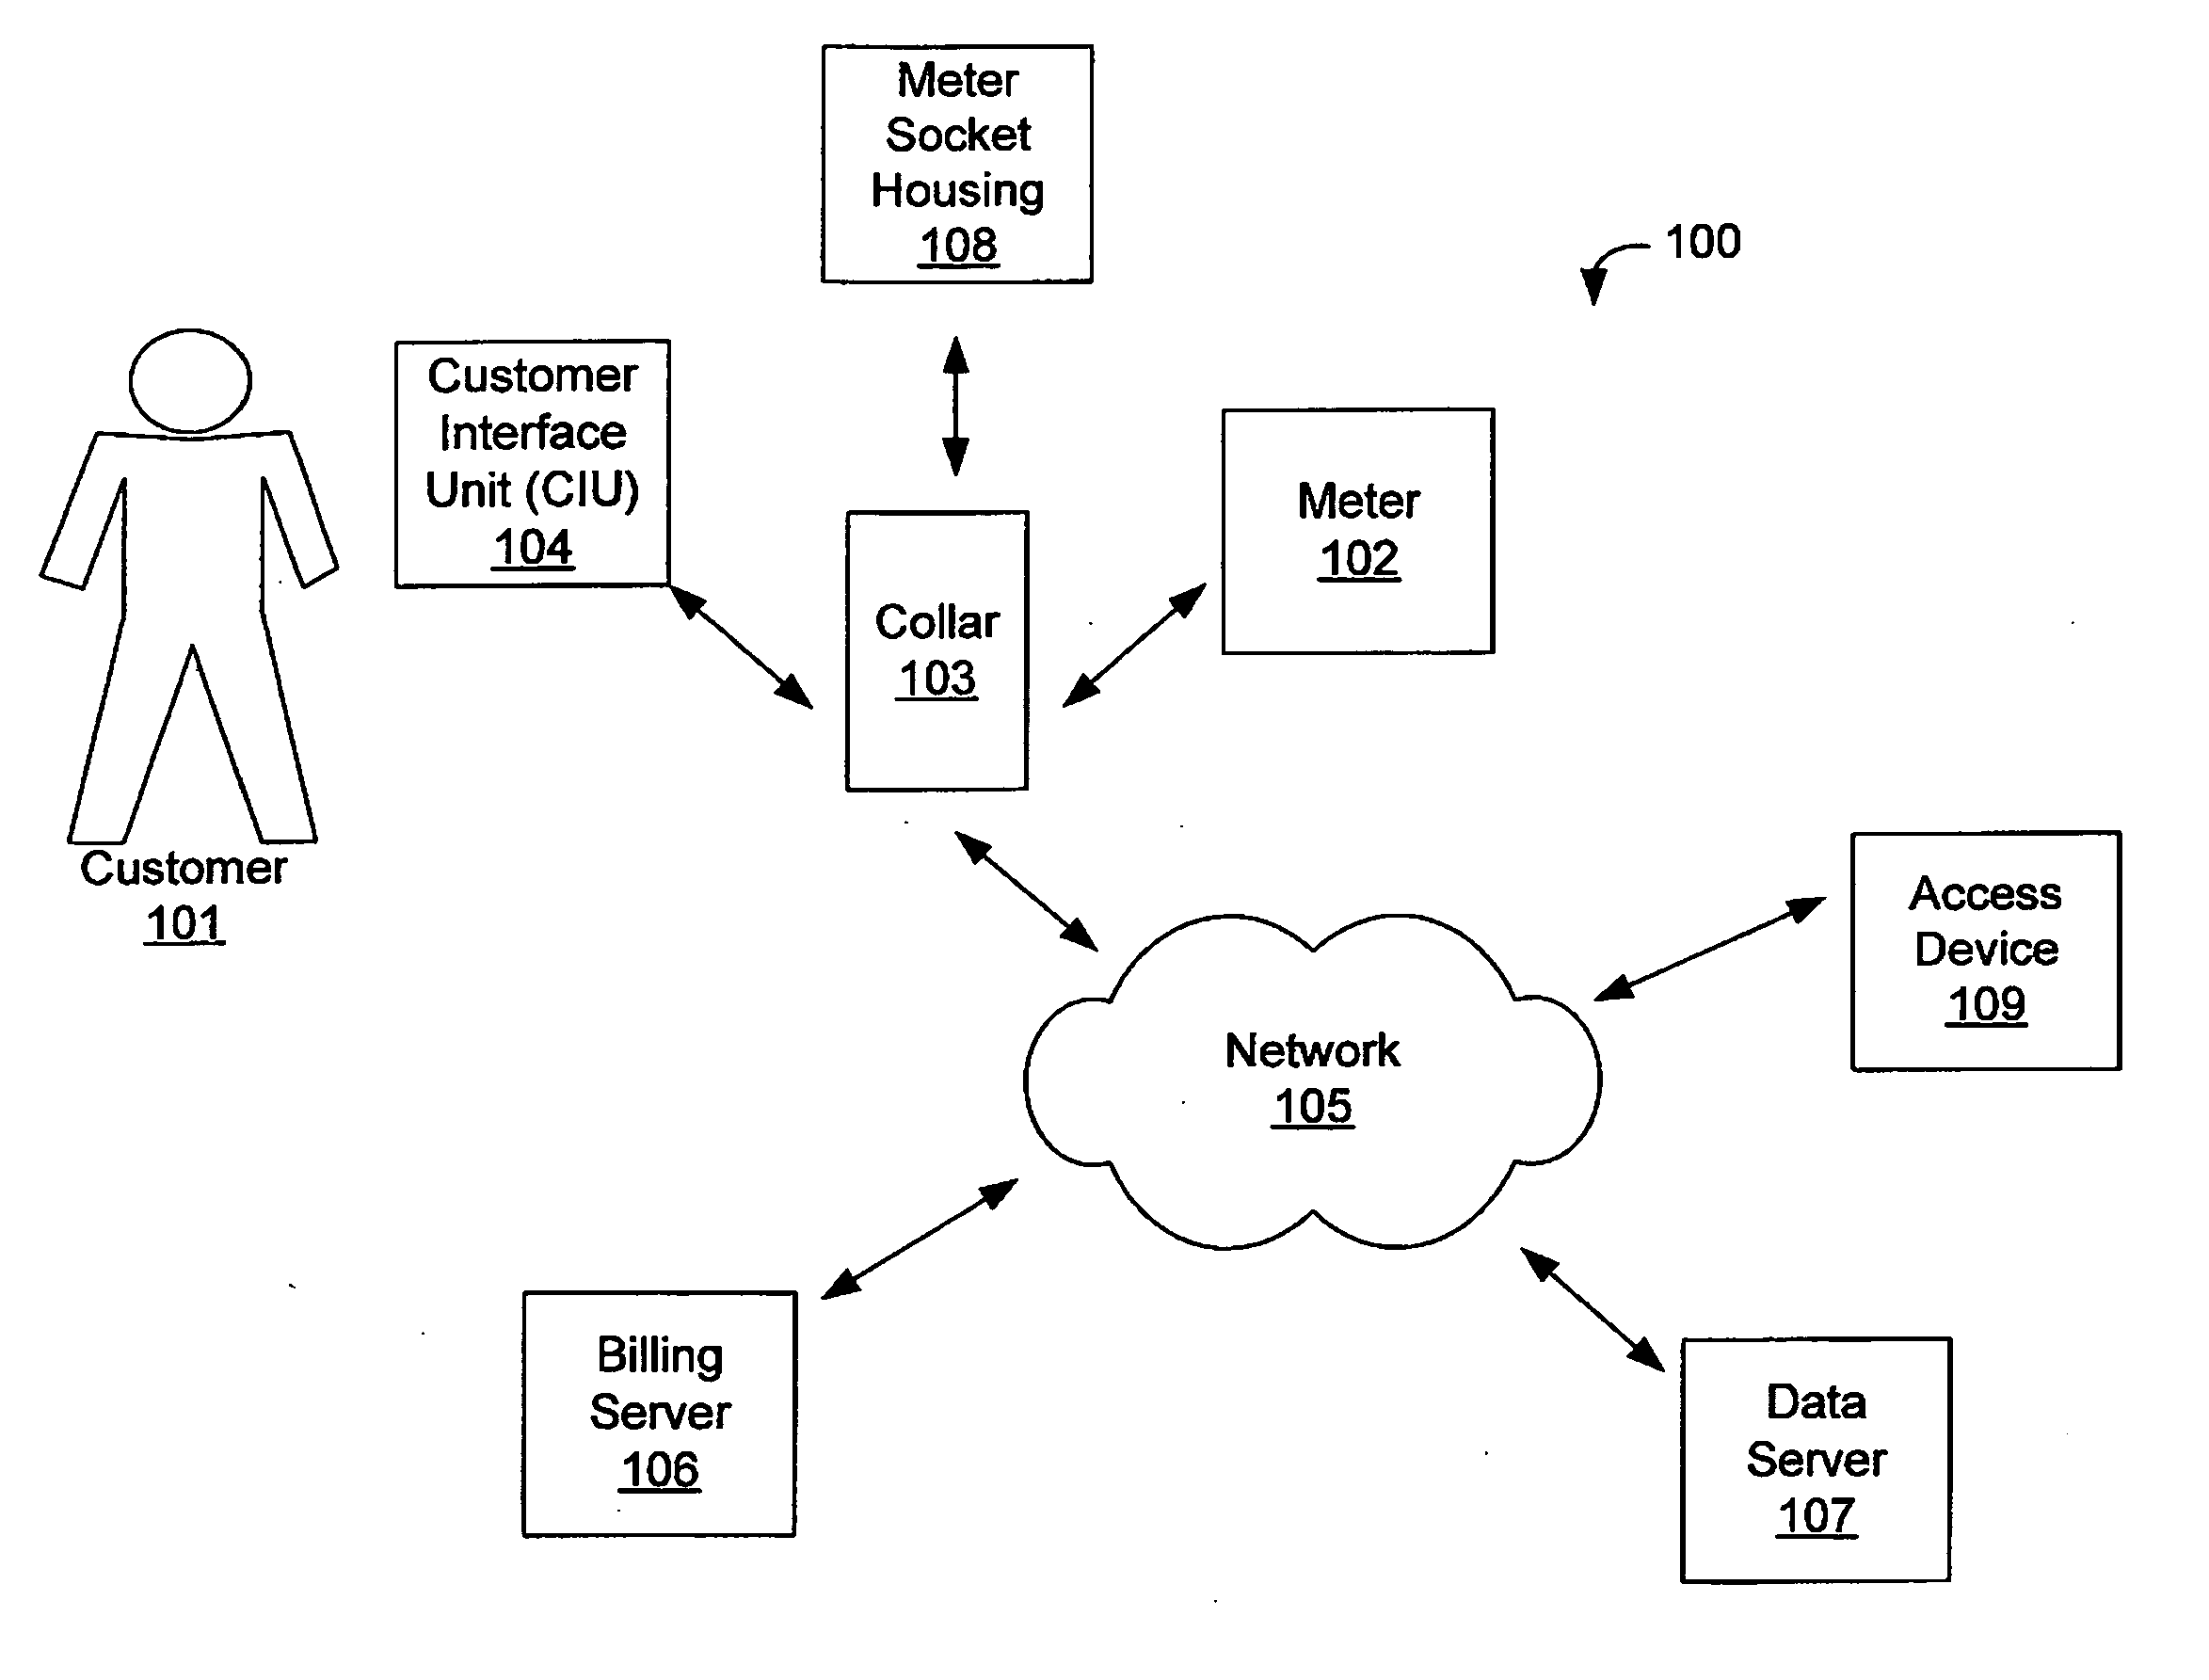 System and method for controlling a utility meter